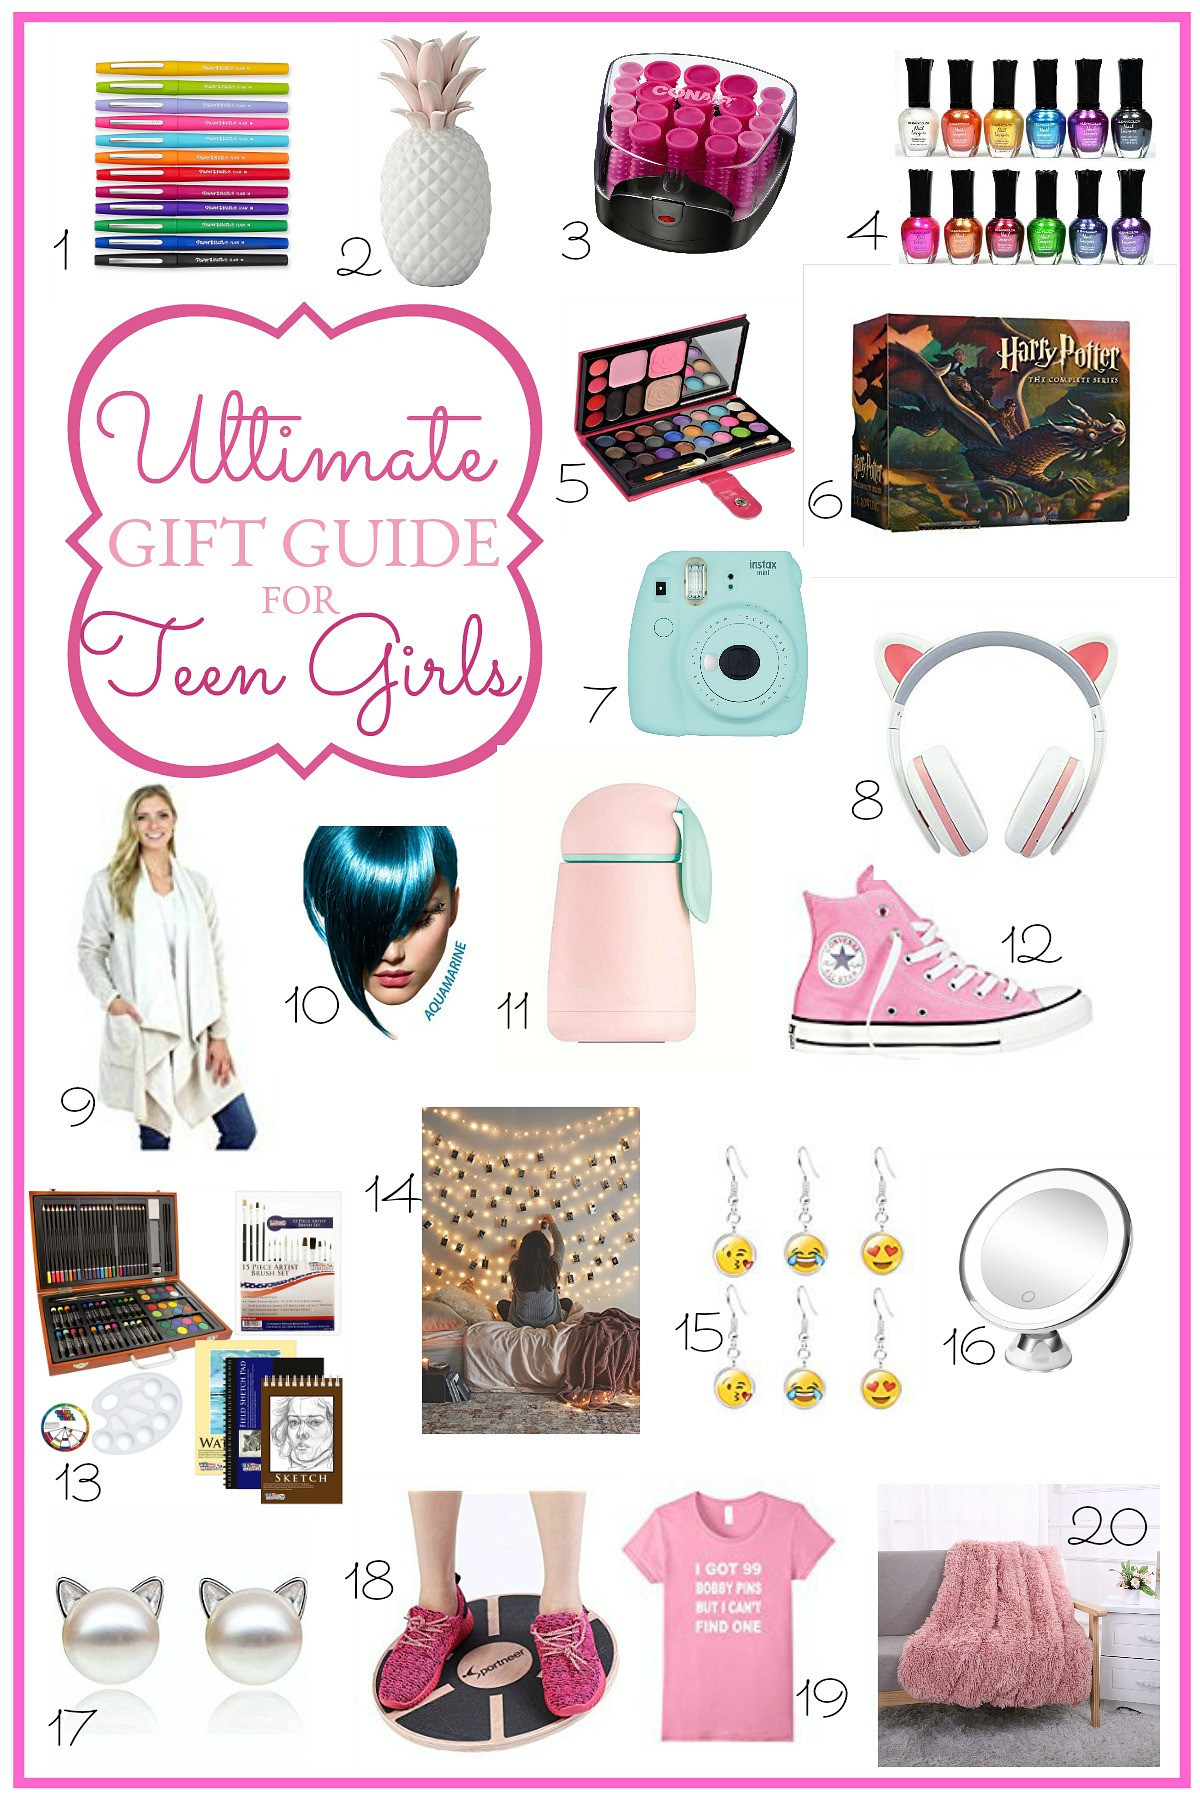 Birthday Gift Ideas For Teenage Girls 14
 Ultimate Holiday Gift Guide for Teen Girls